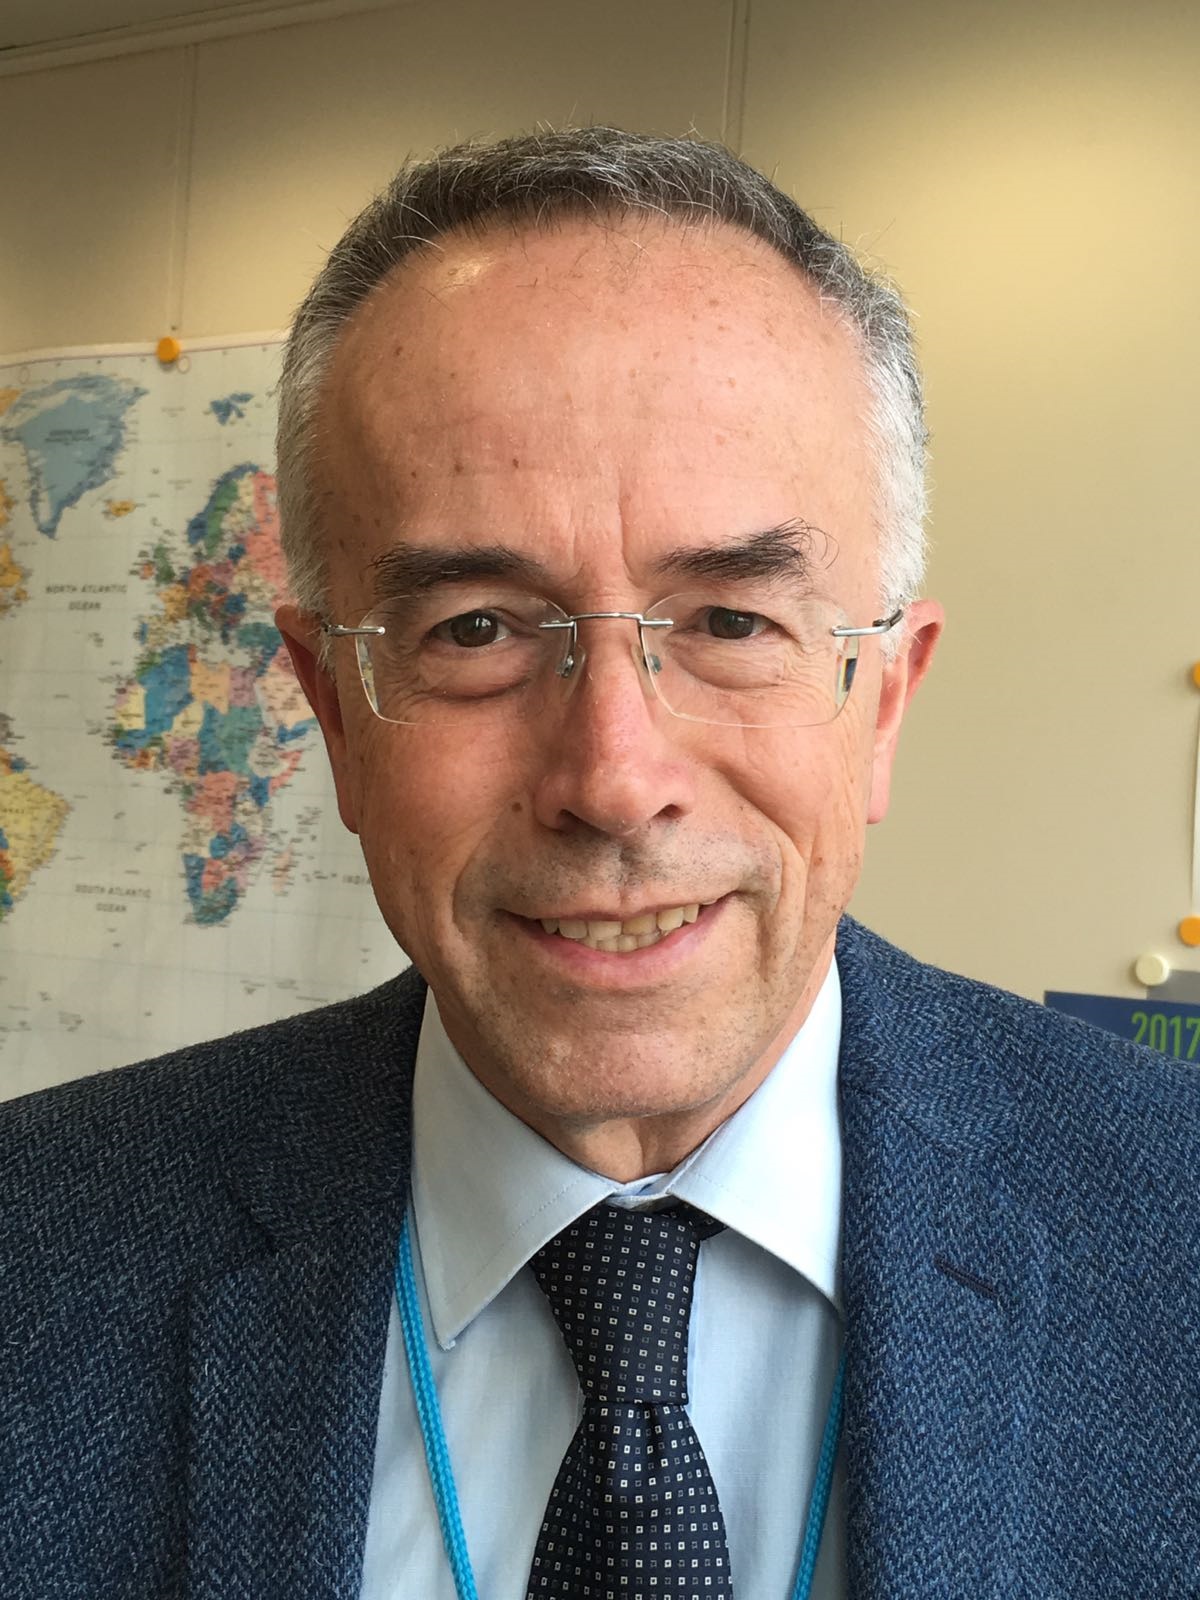 <h5>Director of Prevention, Innovation and Research Unit, Mental Health and Addiction Department, Public Health System, Parma, Italy (Former Chief, UNODC Prevention Branch and founder of ‘Listen First’)</h5>